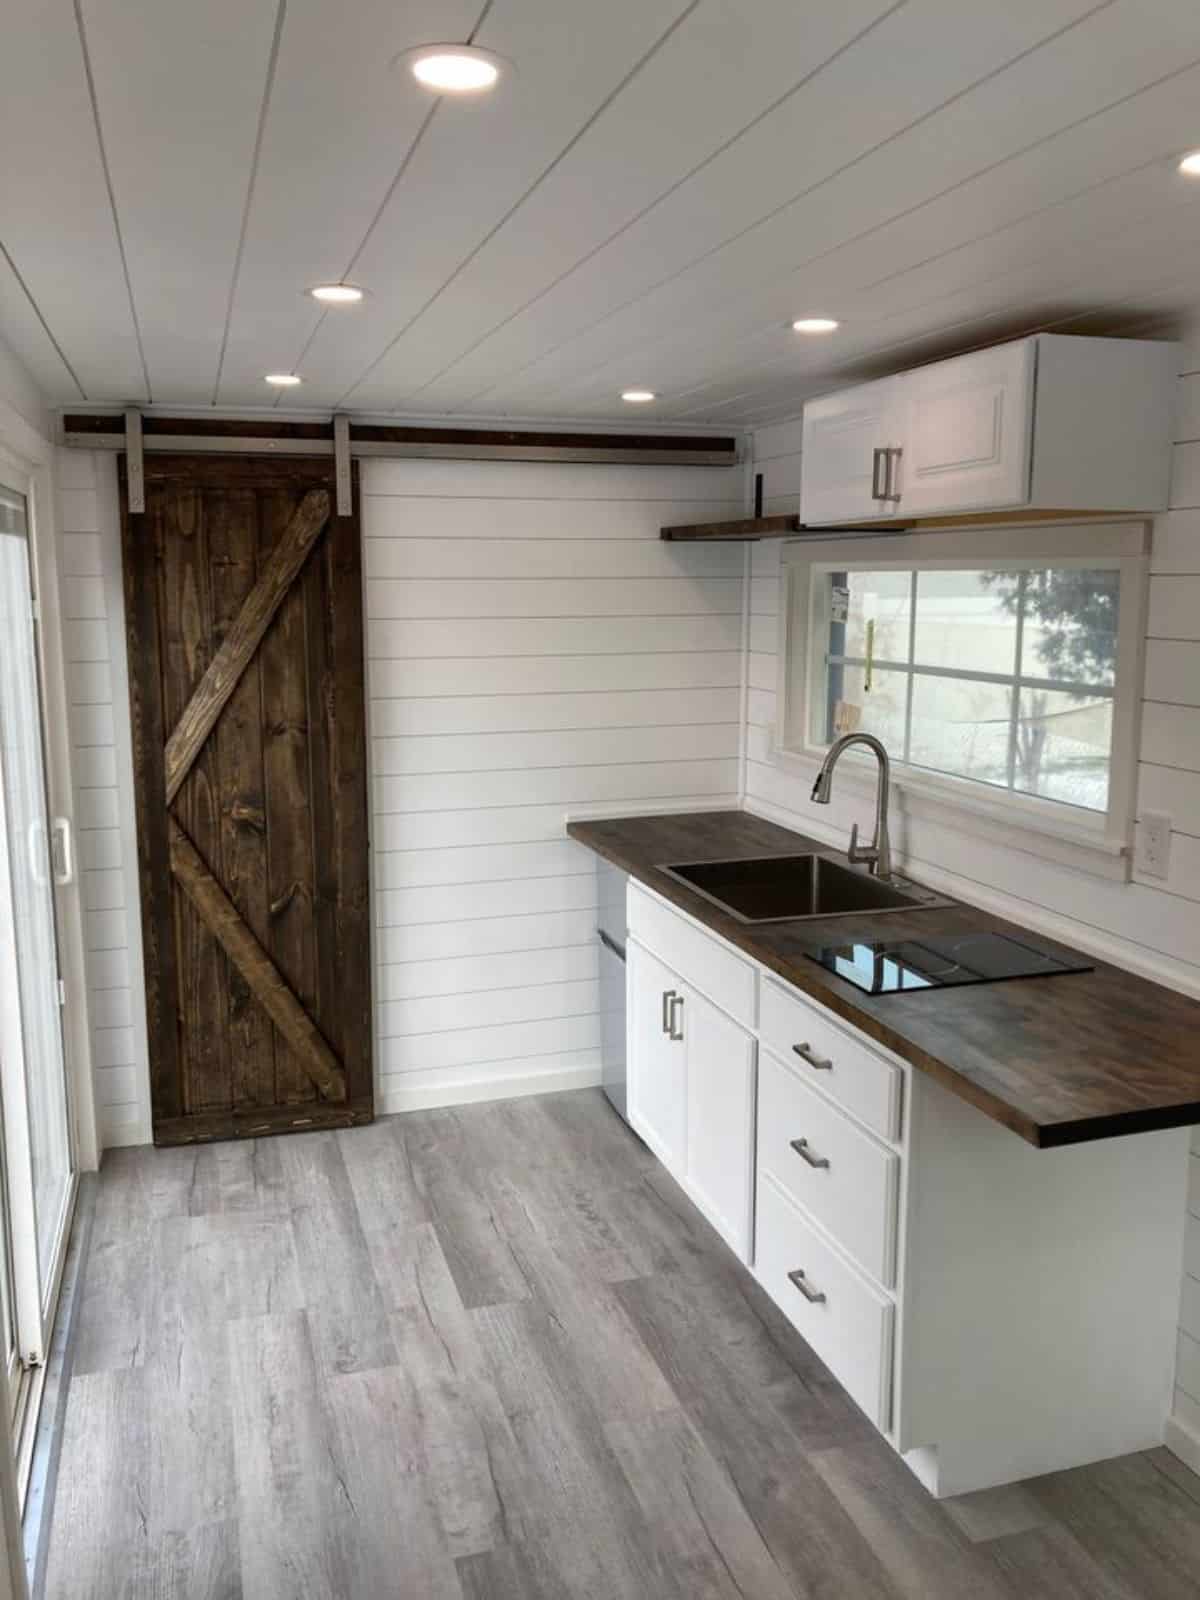 Kitchen area of 20' Small Container Home is very stunning